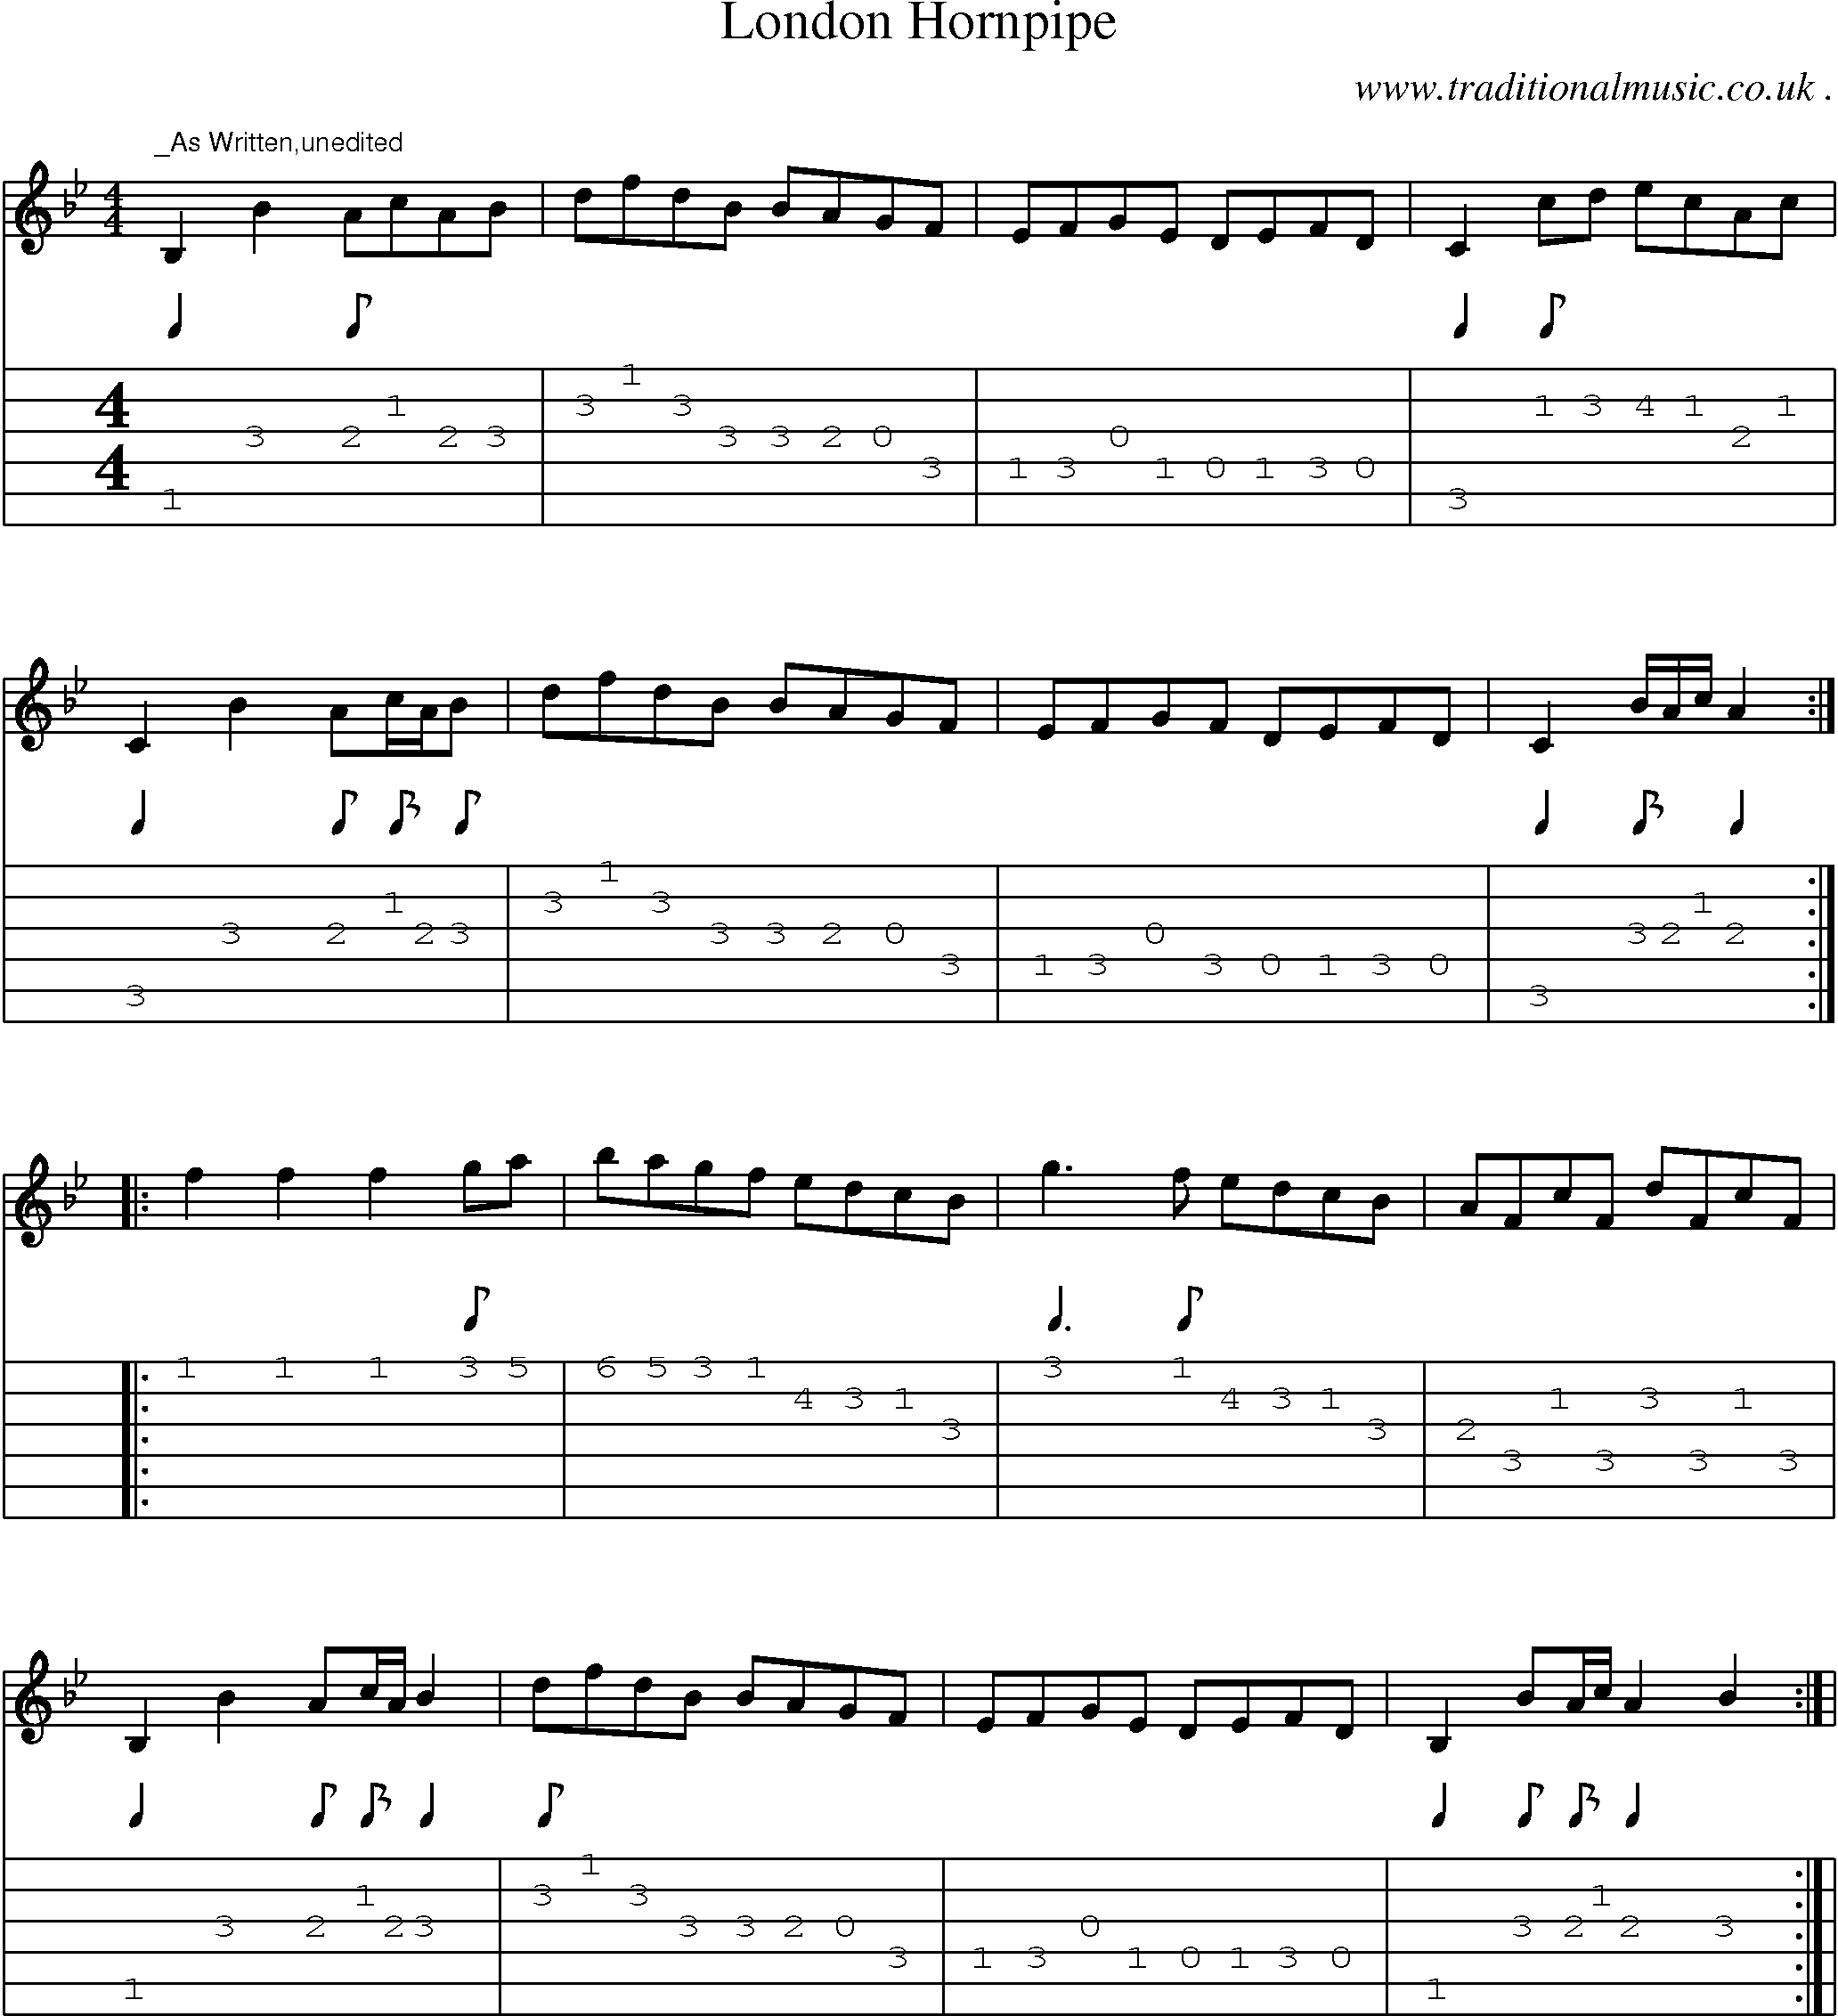 Sheet-Music and Guitar Tabs for London Hornpipe